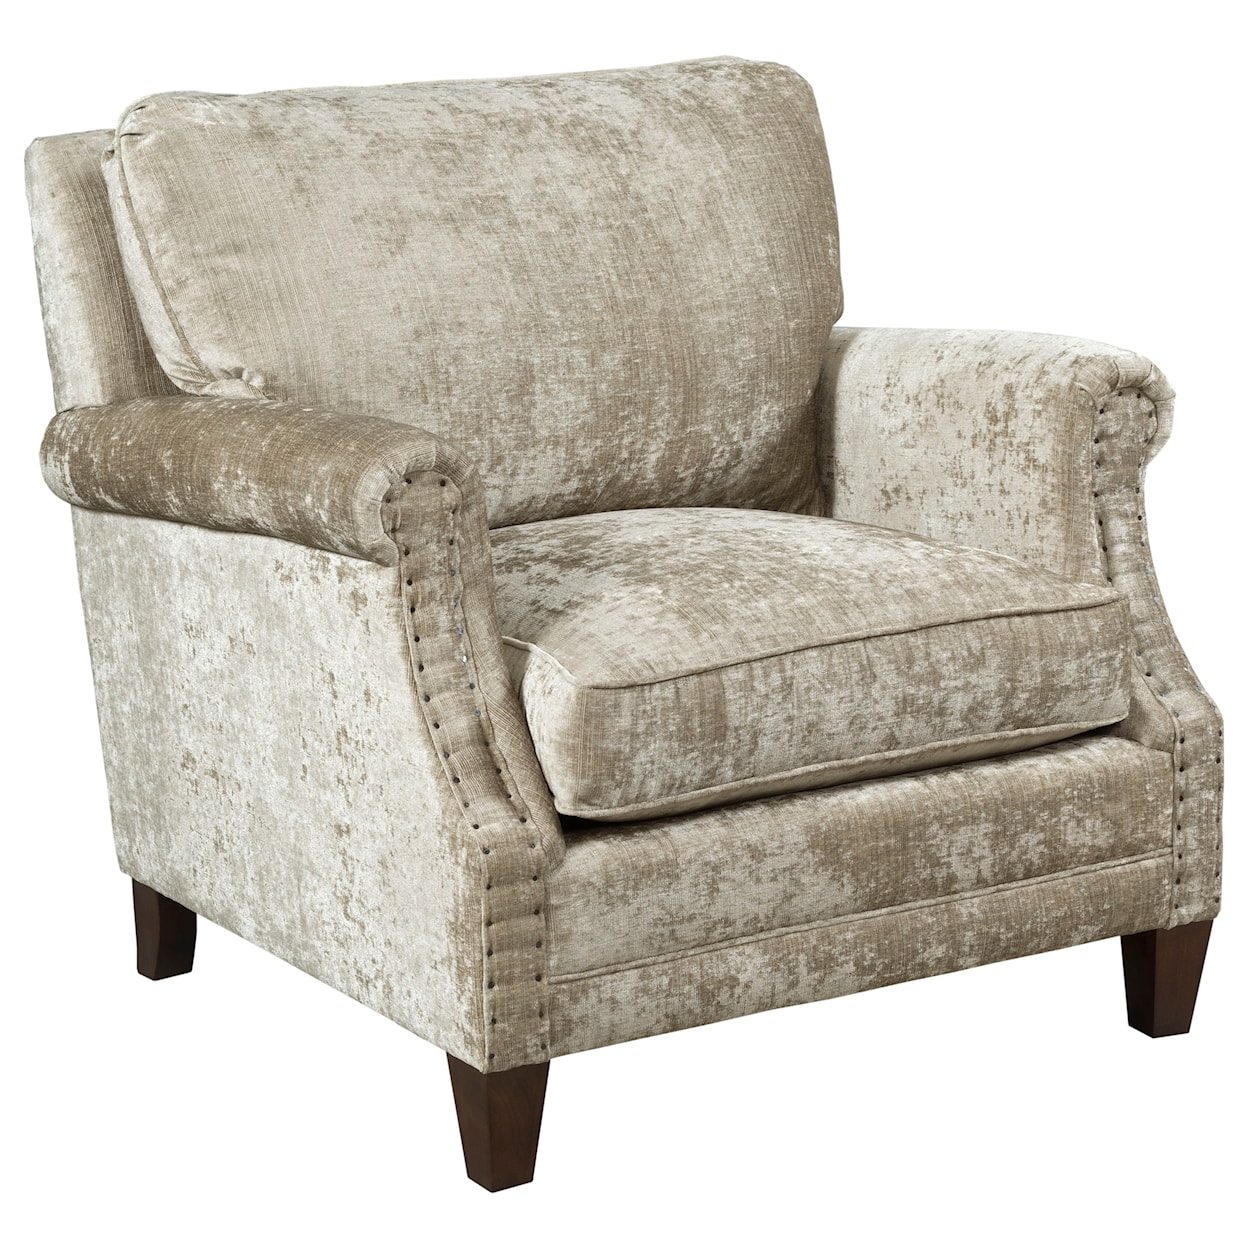 Kincaid Furniture Patterson Upholstered Chair